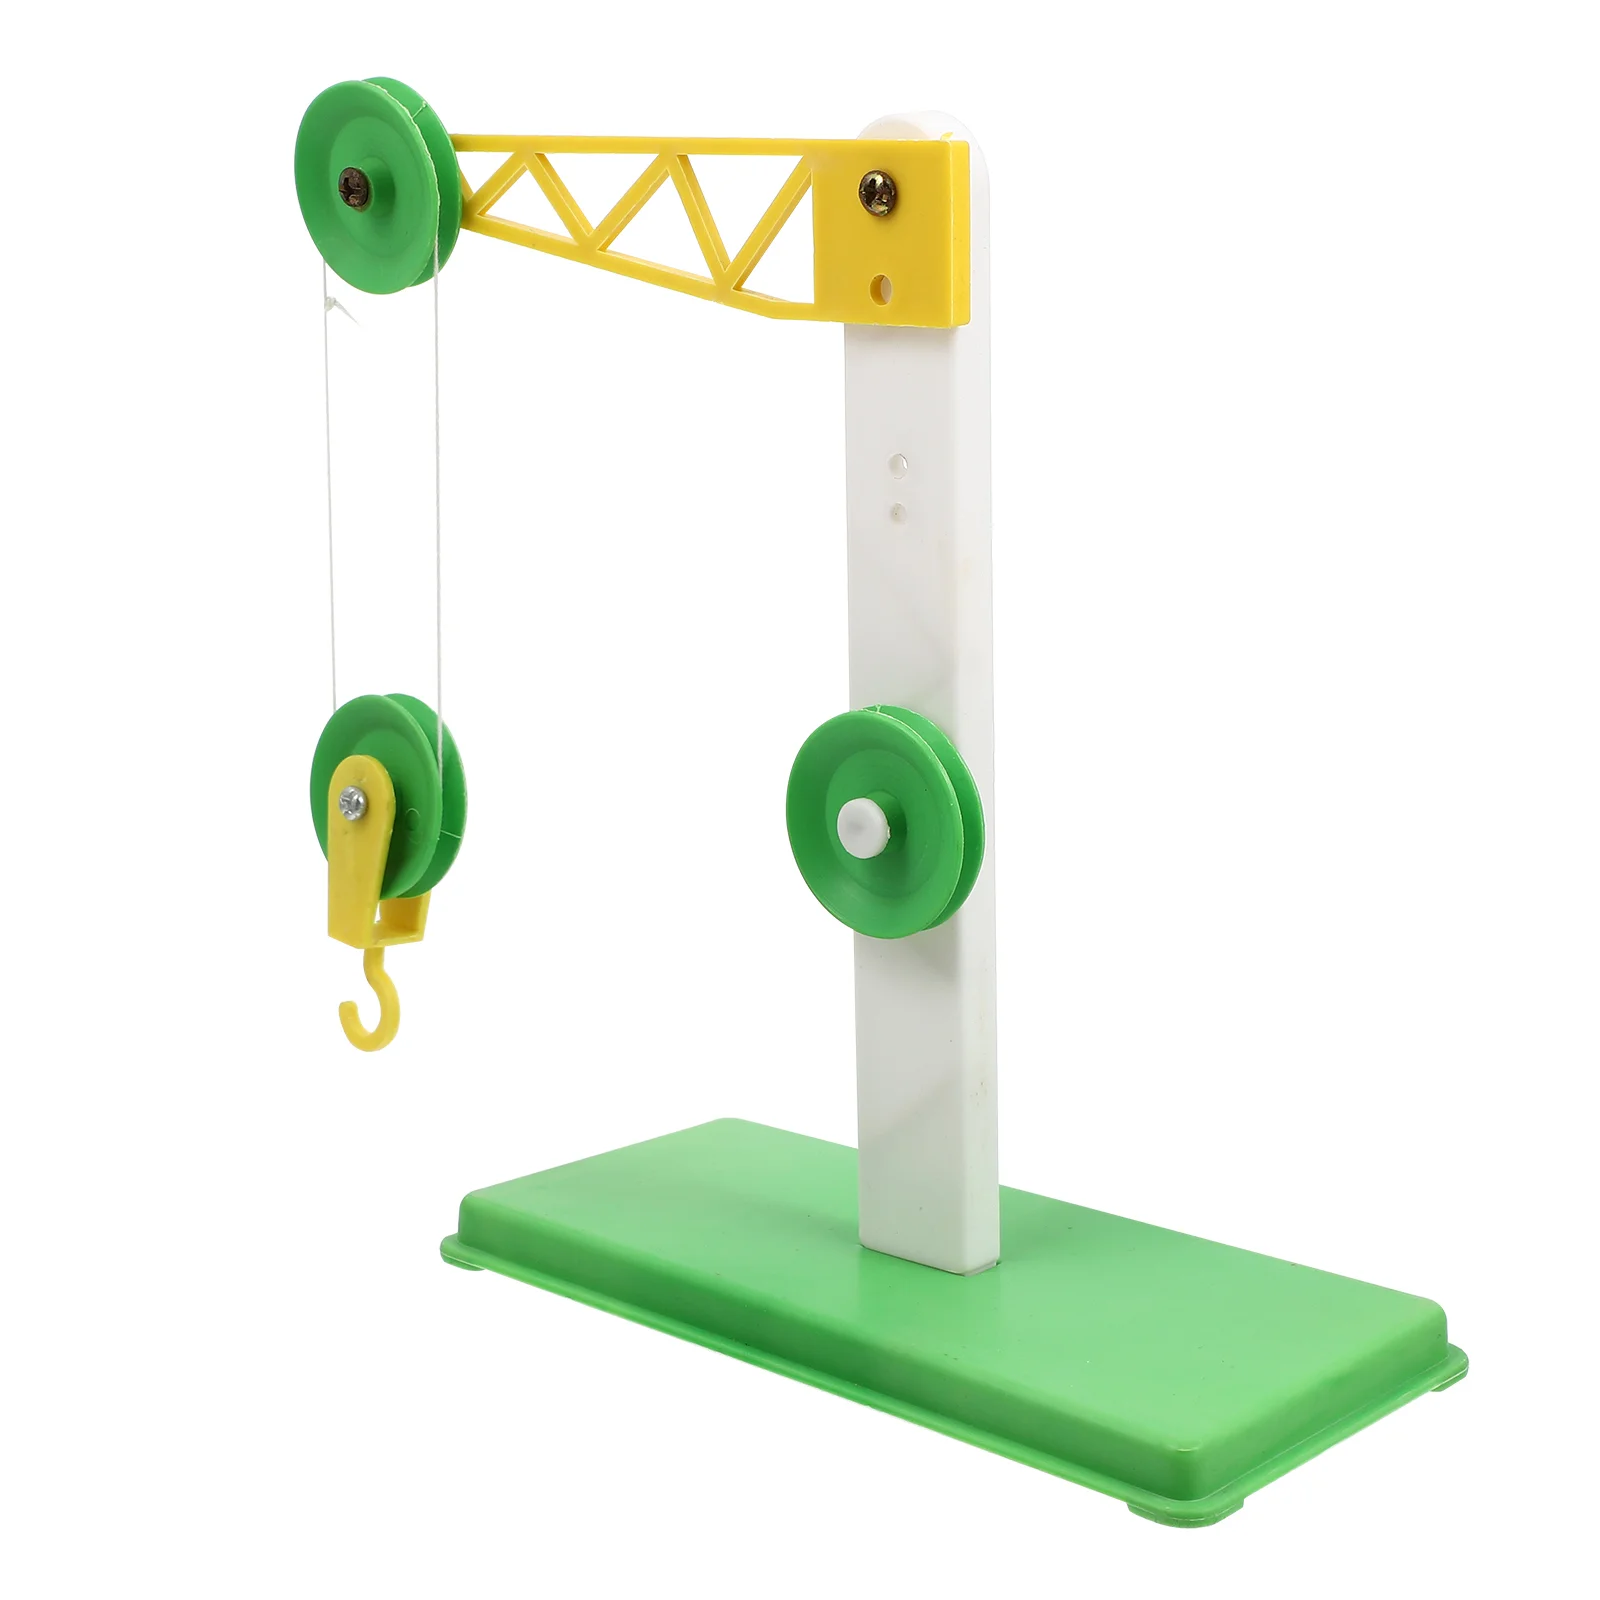 

Pulley Toy Kit Science Model Physics Kids Experiment Teaching Experiments Educational Kits Gear Toys Mechanics Solar Learning